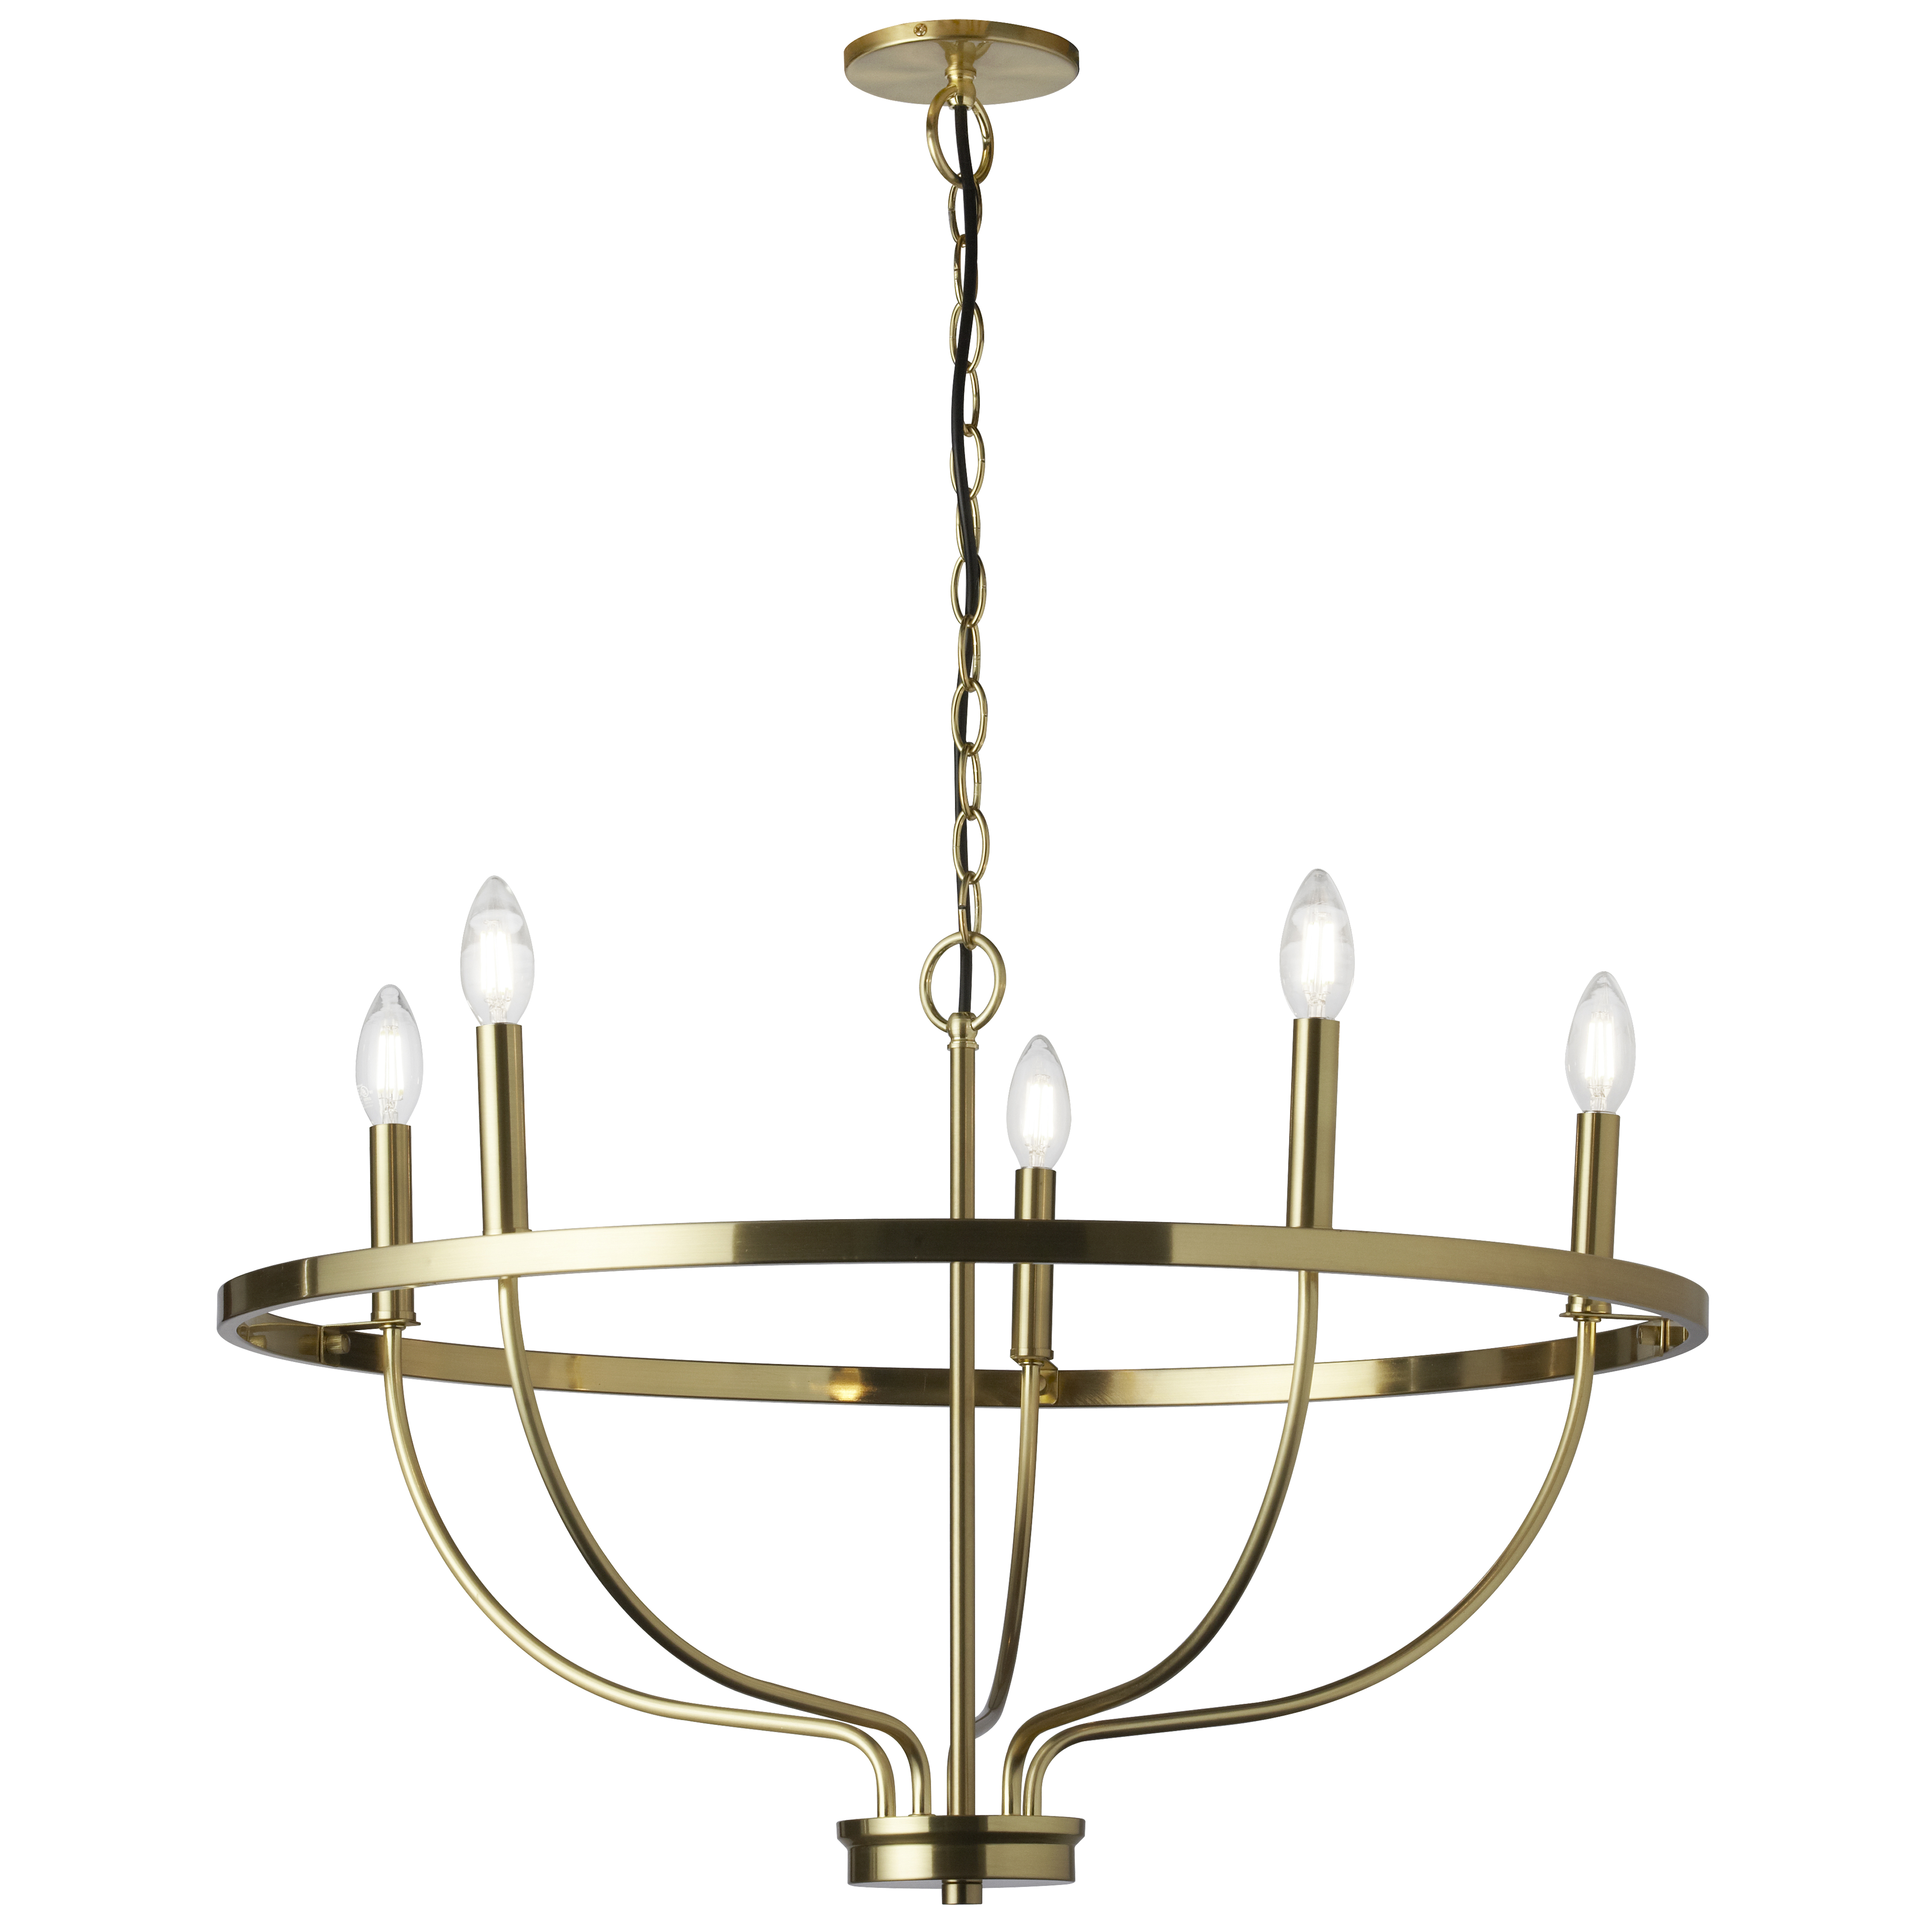 With its timeless curved design, the Cesar chandelier has an effect that's both refined and sophisticated. It combines a sleek, simple sheen with artisan-style elegance for dining rooms, living rooms, and larger bedrooms.  The metal base incorporates a chain drop, and a rounded frame with acrylic bulbs. Using bulbs that emulate the shape of a flame, with an asymmetrical 5-light configuration, it has both modern and traditional appeal.  The Cesar chandelier adds an atmosphere of classic style to your home, with a subtle edge of modernism.